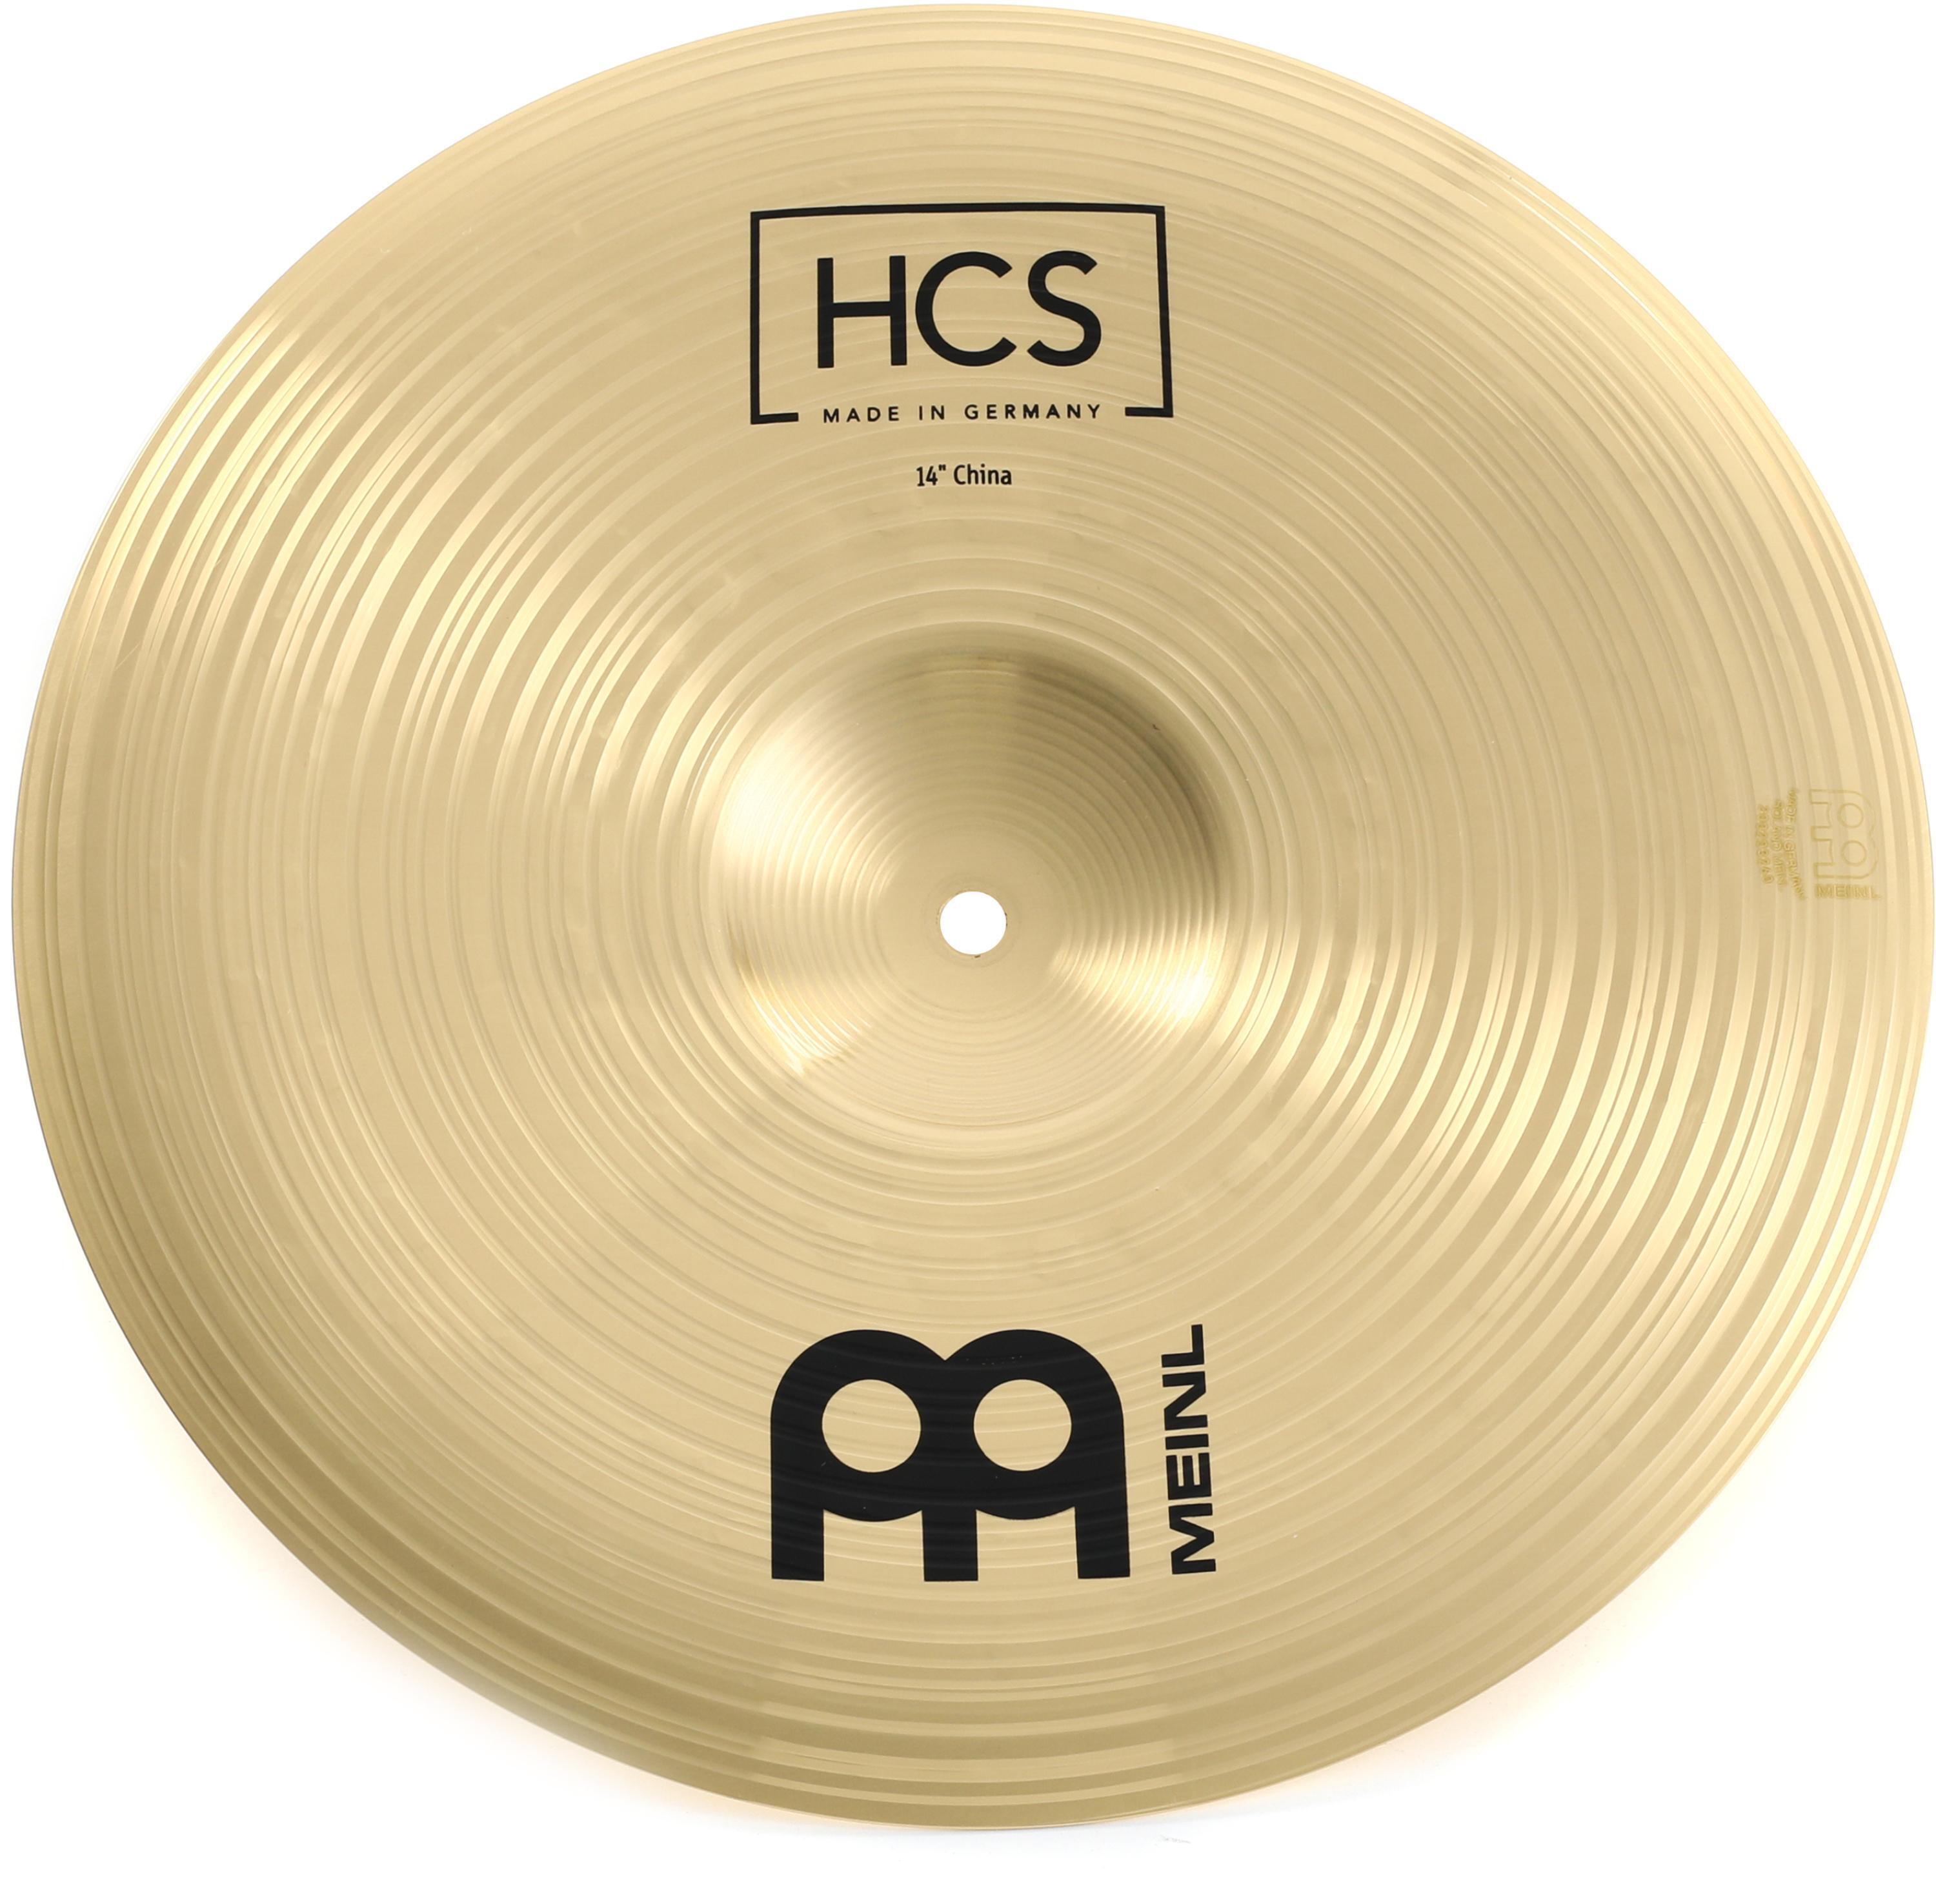 Meinl Cymbals 14-inch HCS China Cymbal Sweetwater